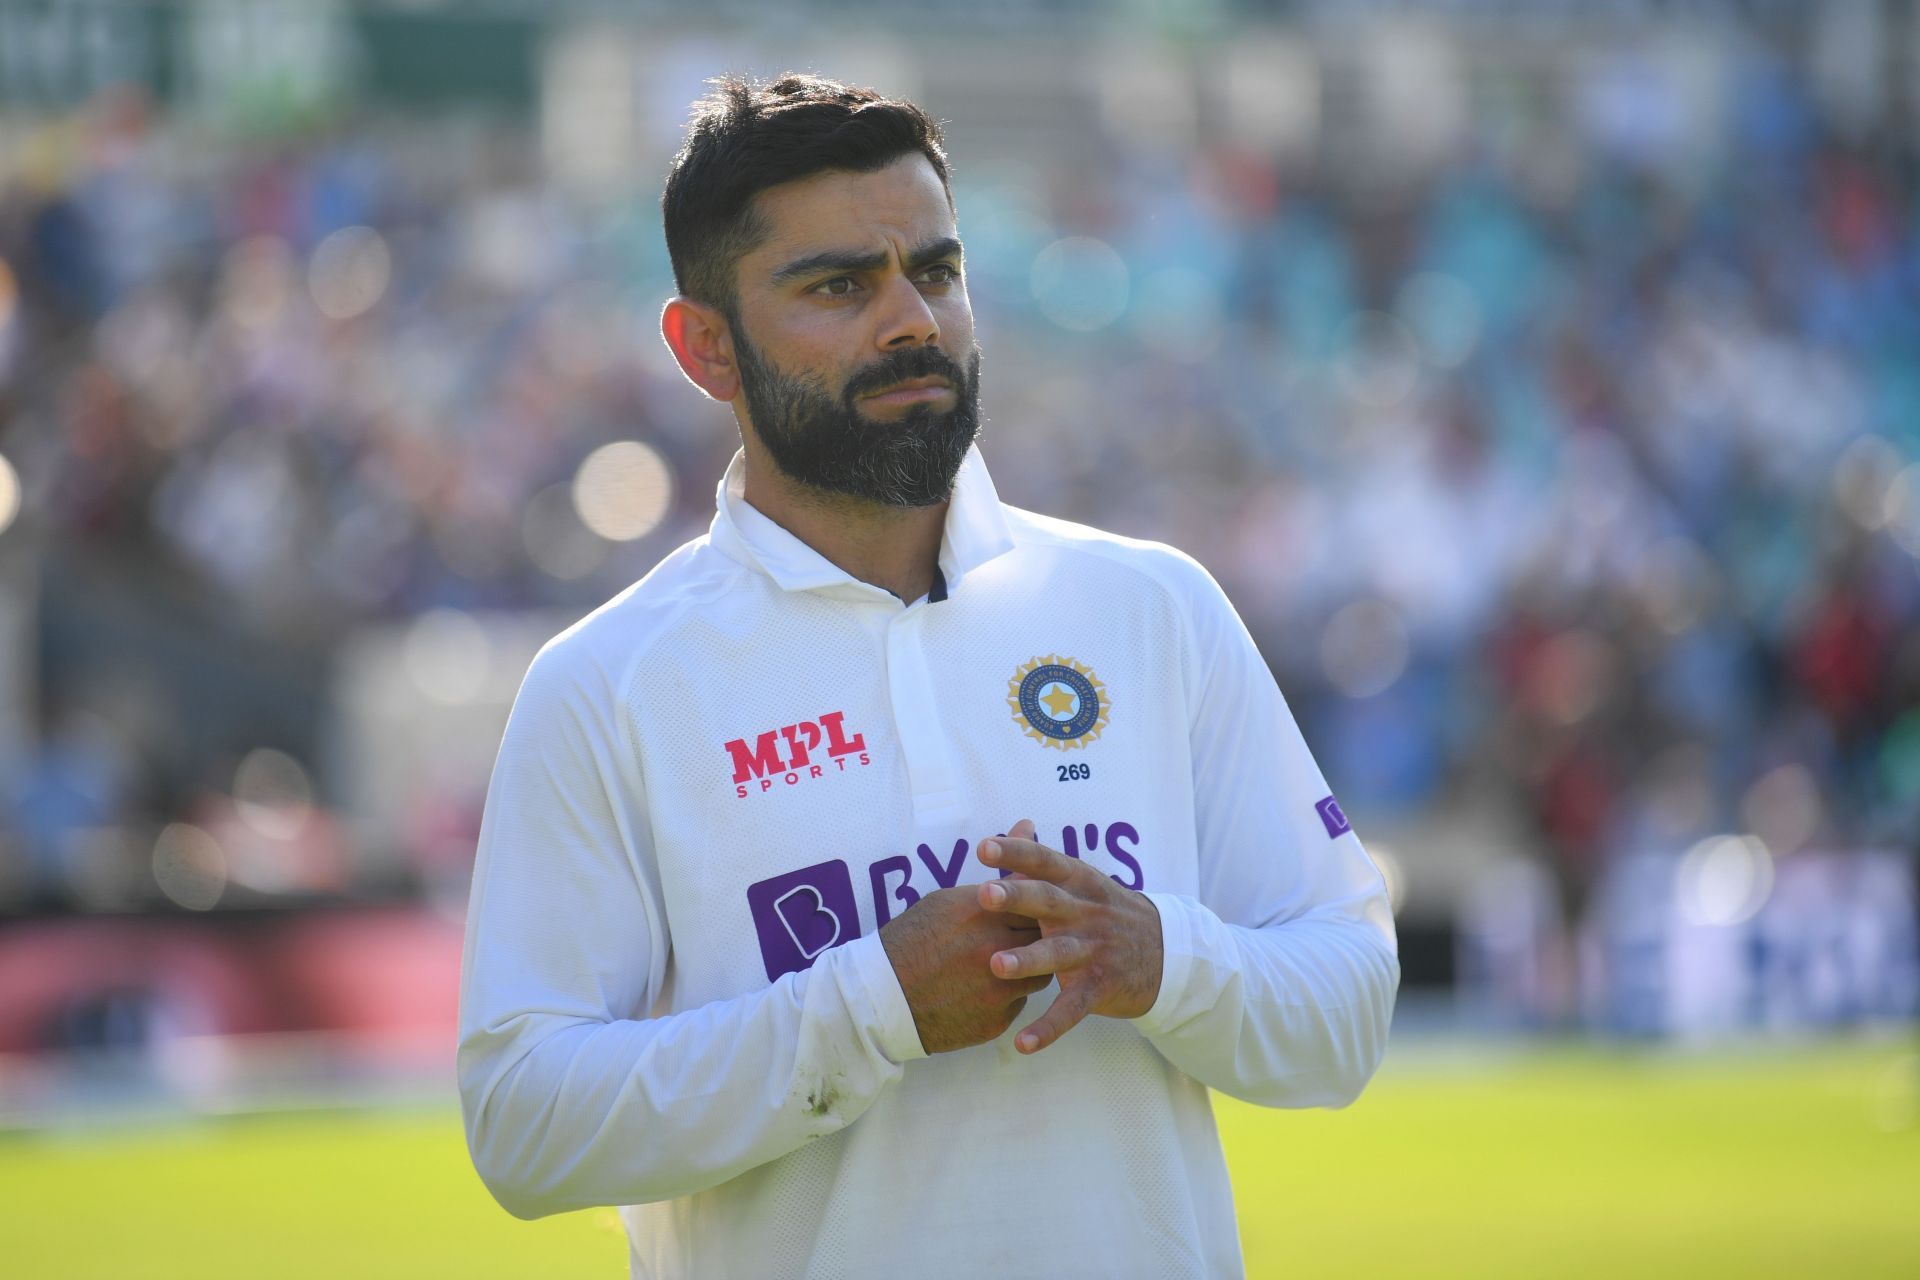 Virat Kohli has given up or lost his captaincy in all three formats in the last few months.